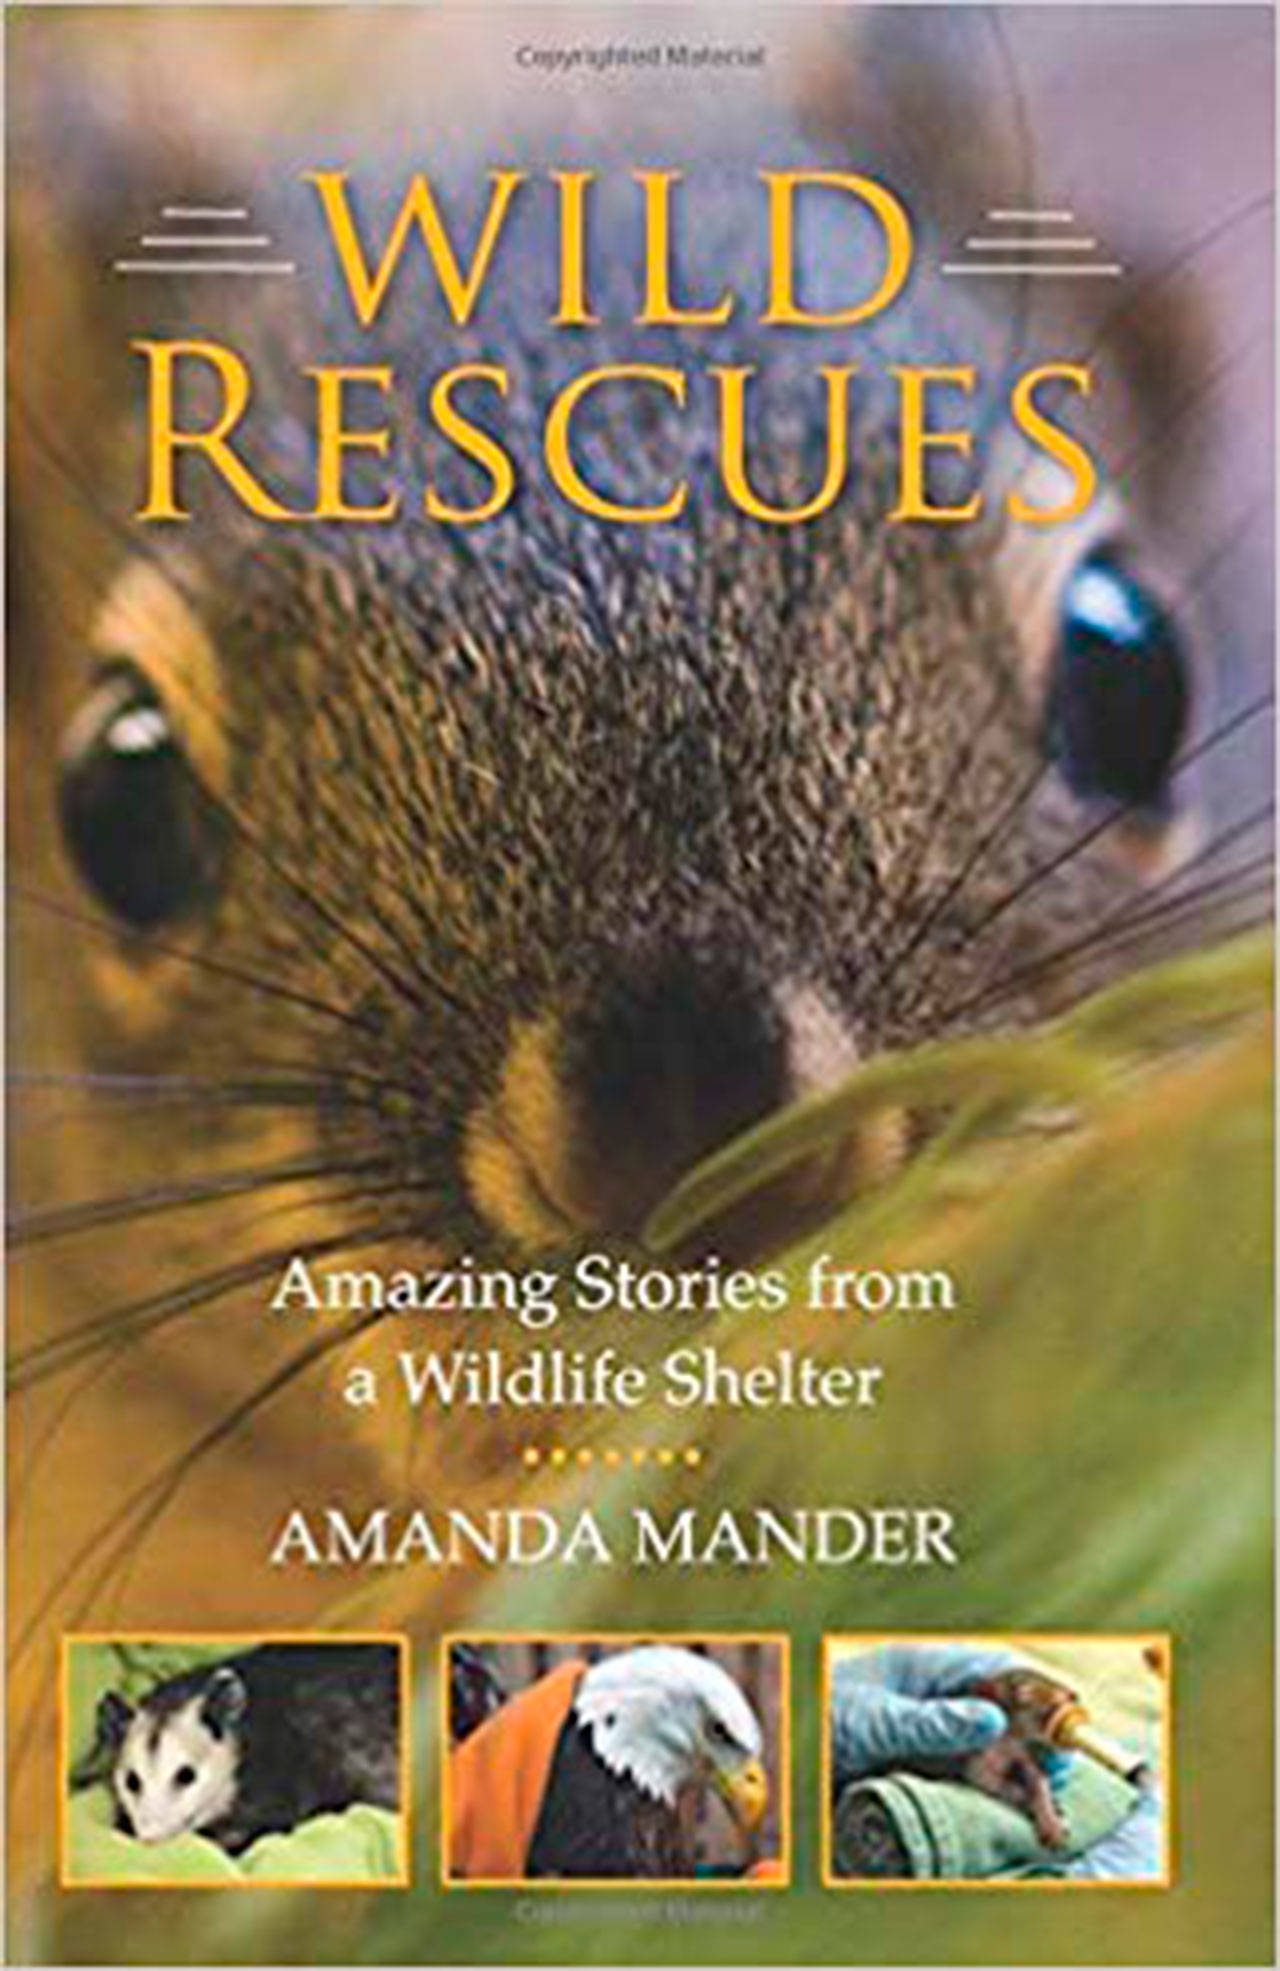 Image courtesy of Eagle Harbor Book Company | Amanda Mander will mark the launch of her new book “Wild Rescues: Amazing Stories from a Wildlife Shelter” with a visit to Eagle Harbor Book Company at 3 p.m. Sunday, Jan. 13.